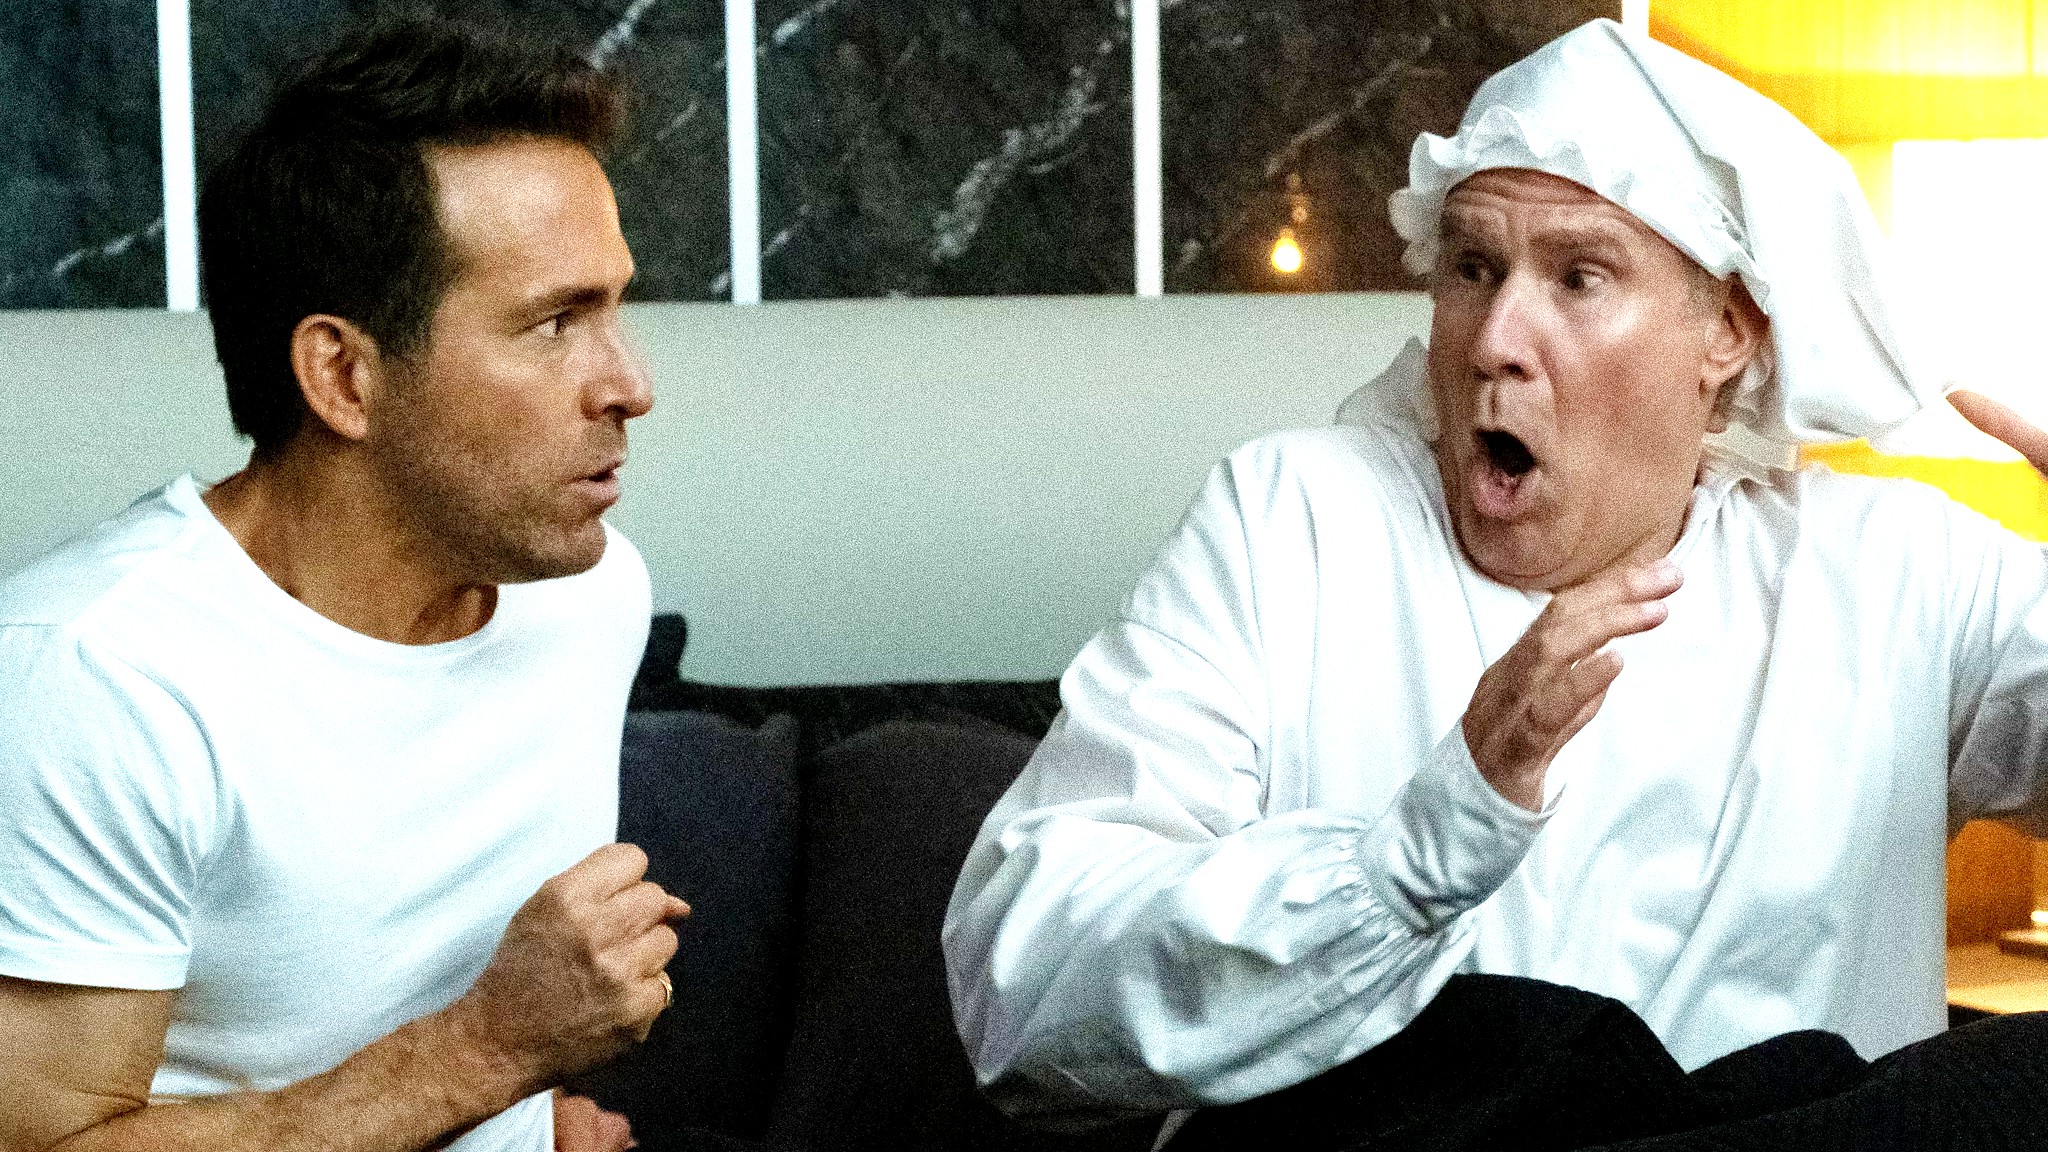 Spirited Review - Can Will Ferrell and Ryan Reynolds Save Christmas? 